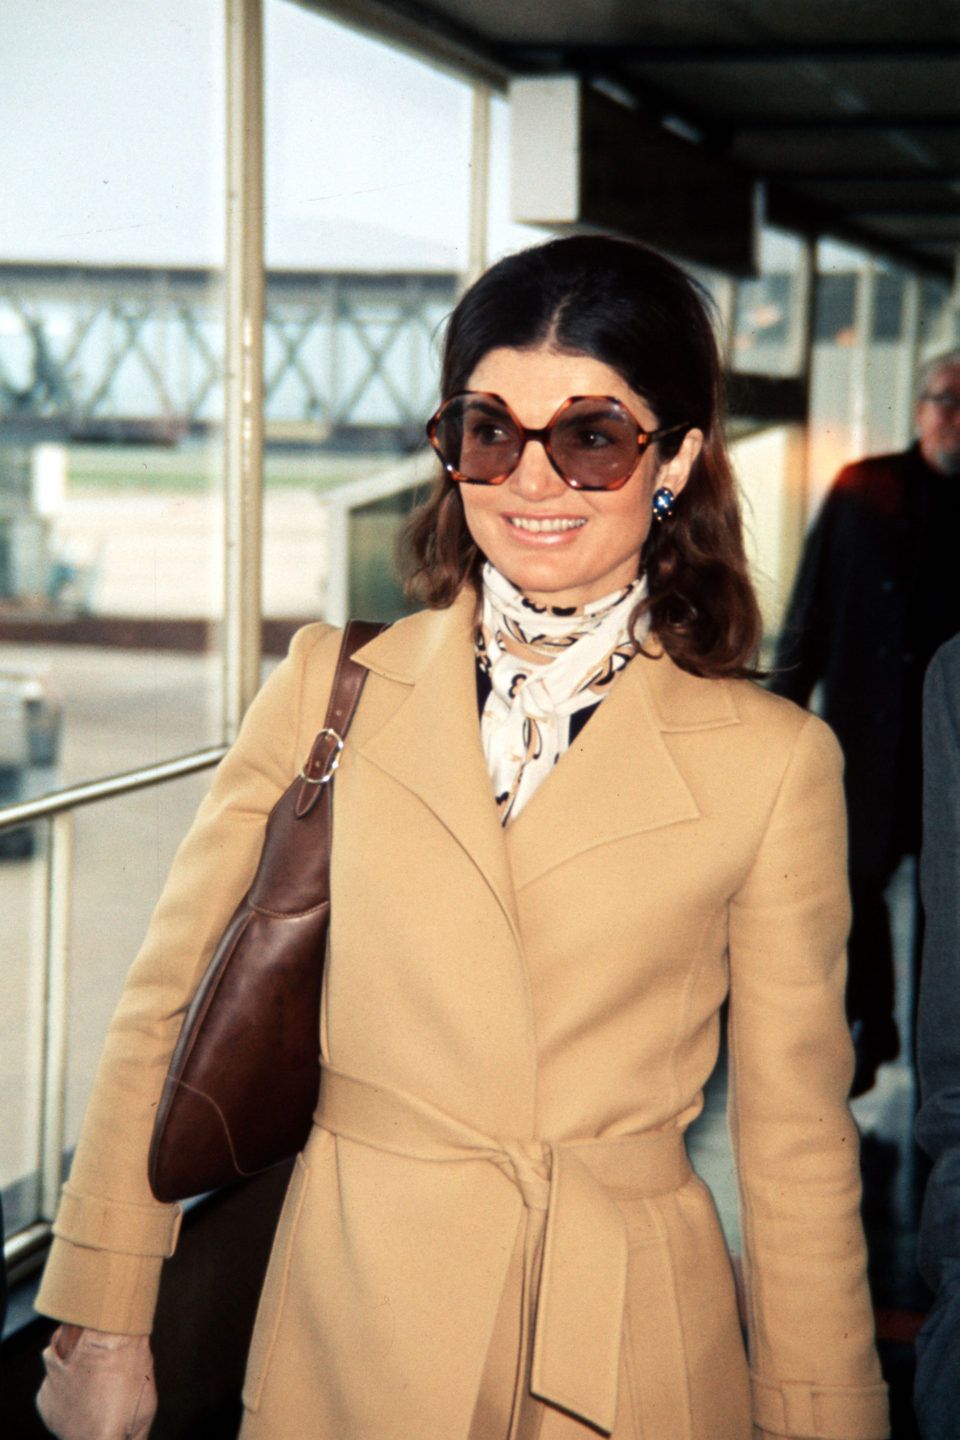 happy-birthday-Jackie O, A Look At Her Jet Set Style Years - happy-birthday-Jackie O, A Look At Her Jet Set Style Years -   15 70s style Icons ideas